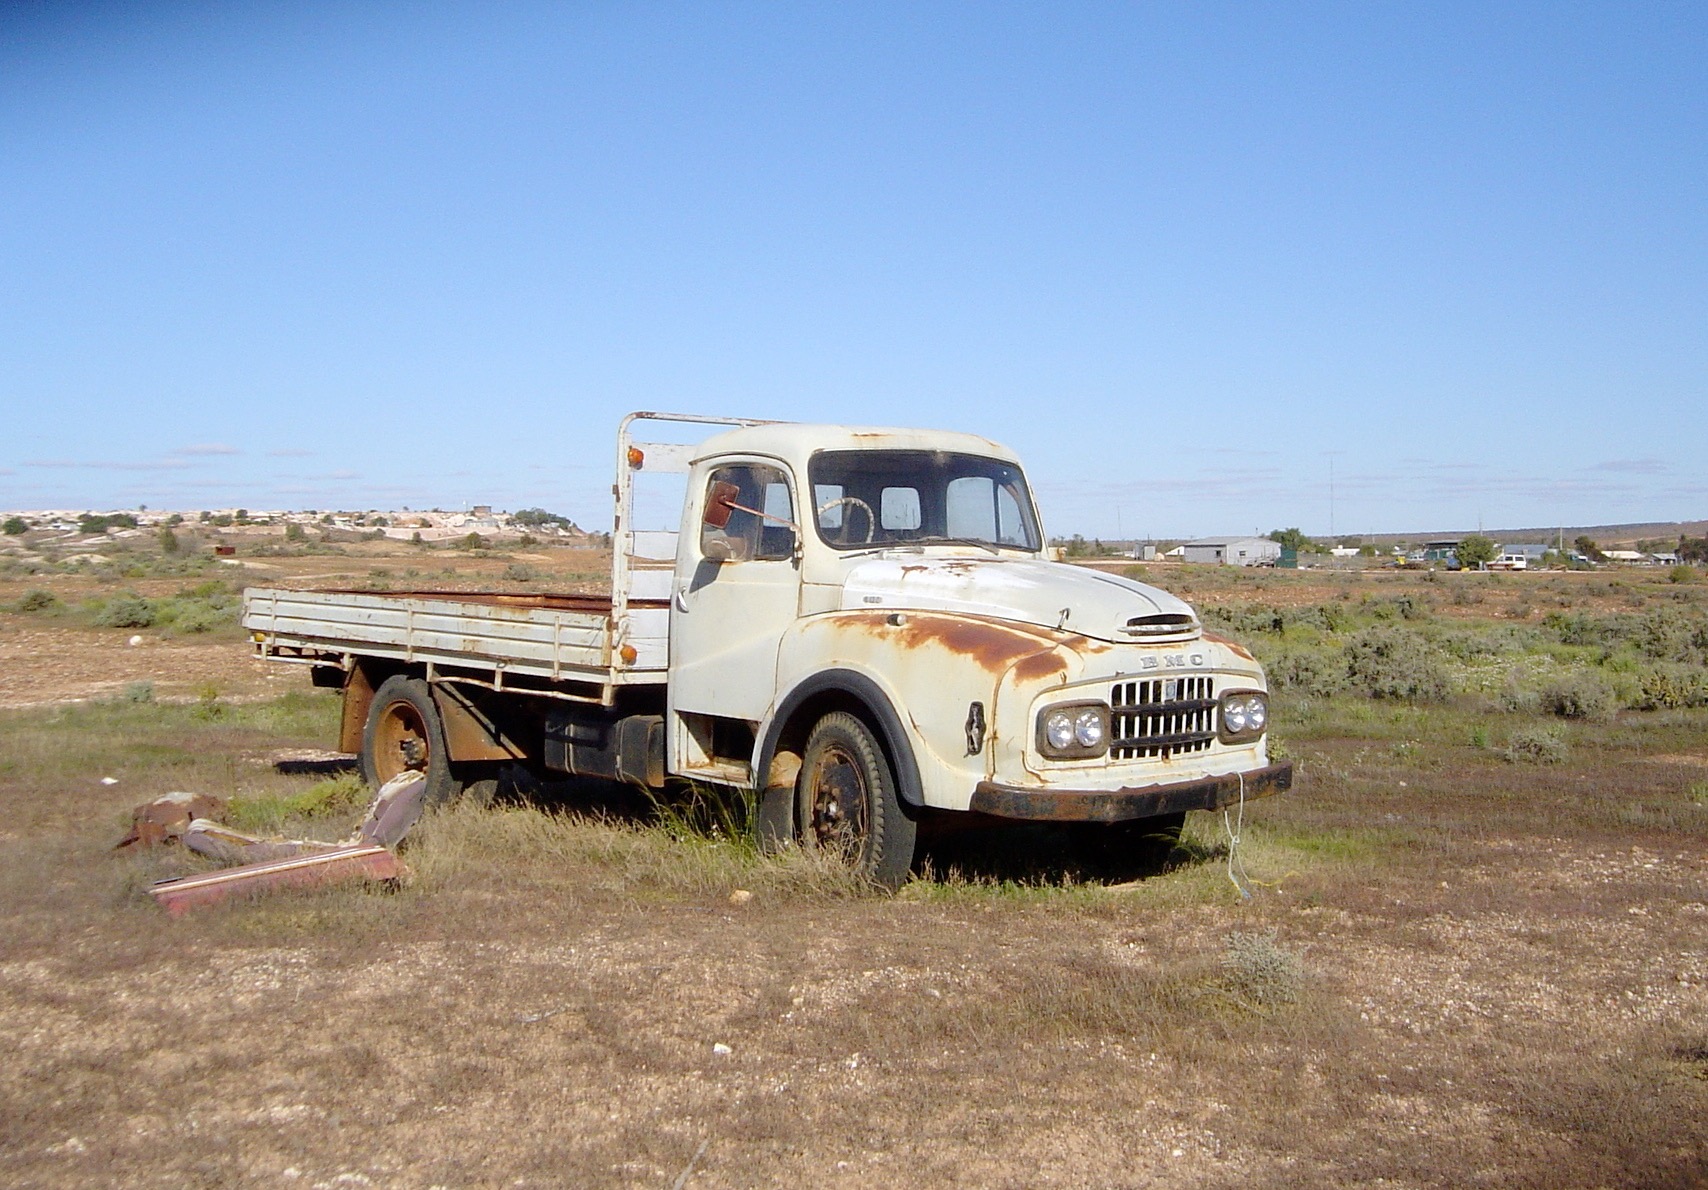 An Old Truck in Good Condition.